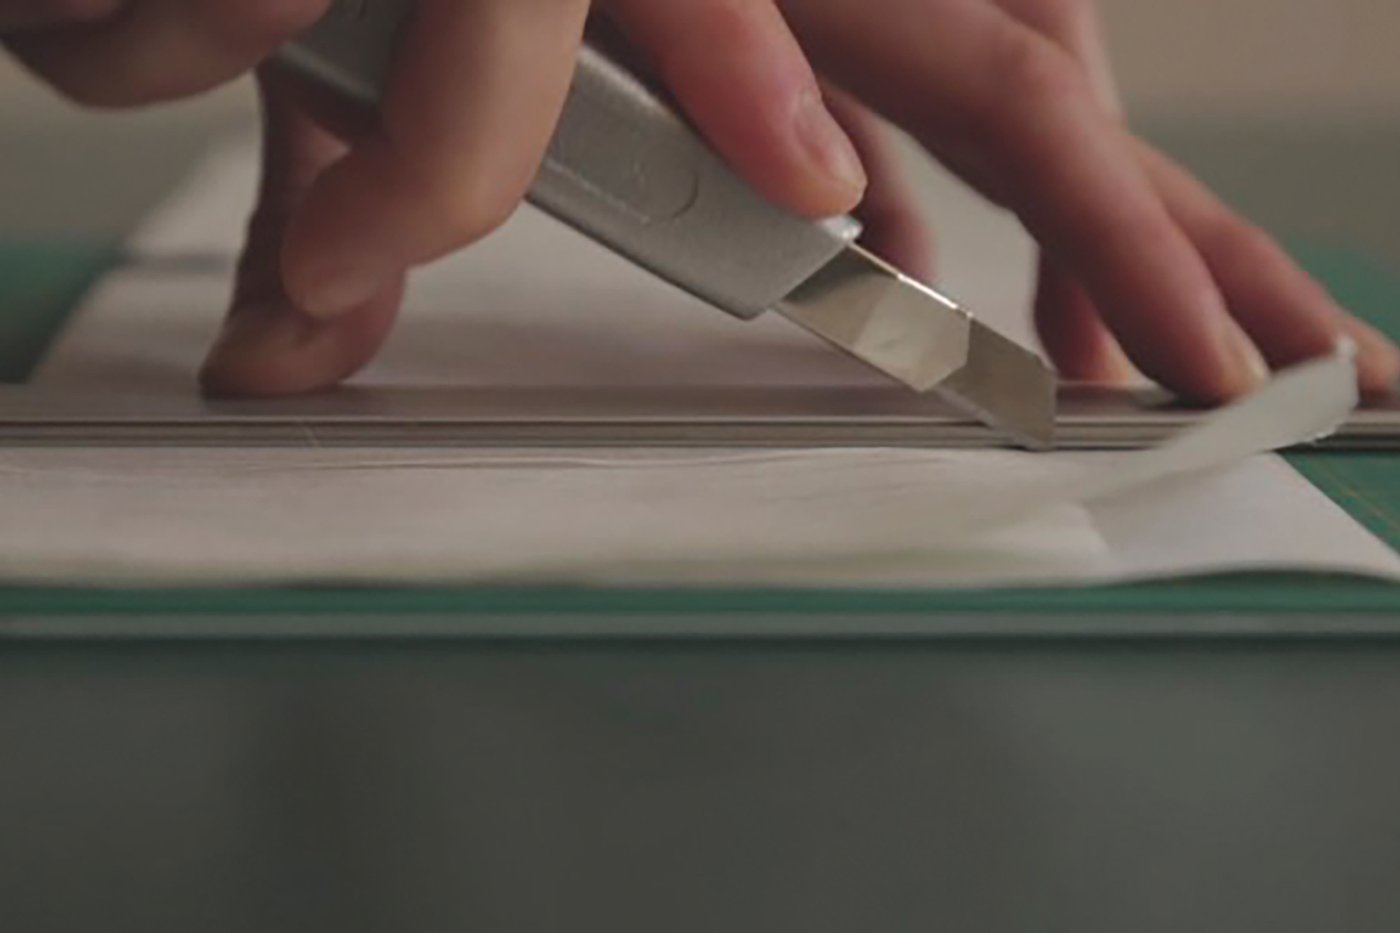 Hands can be seen using a silver paper knife and a ruler to cut through three superimposed pages of paper on a green cutting pad.